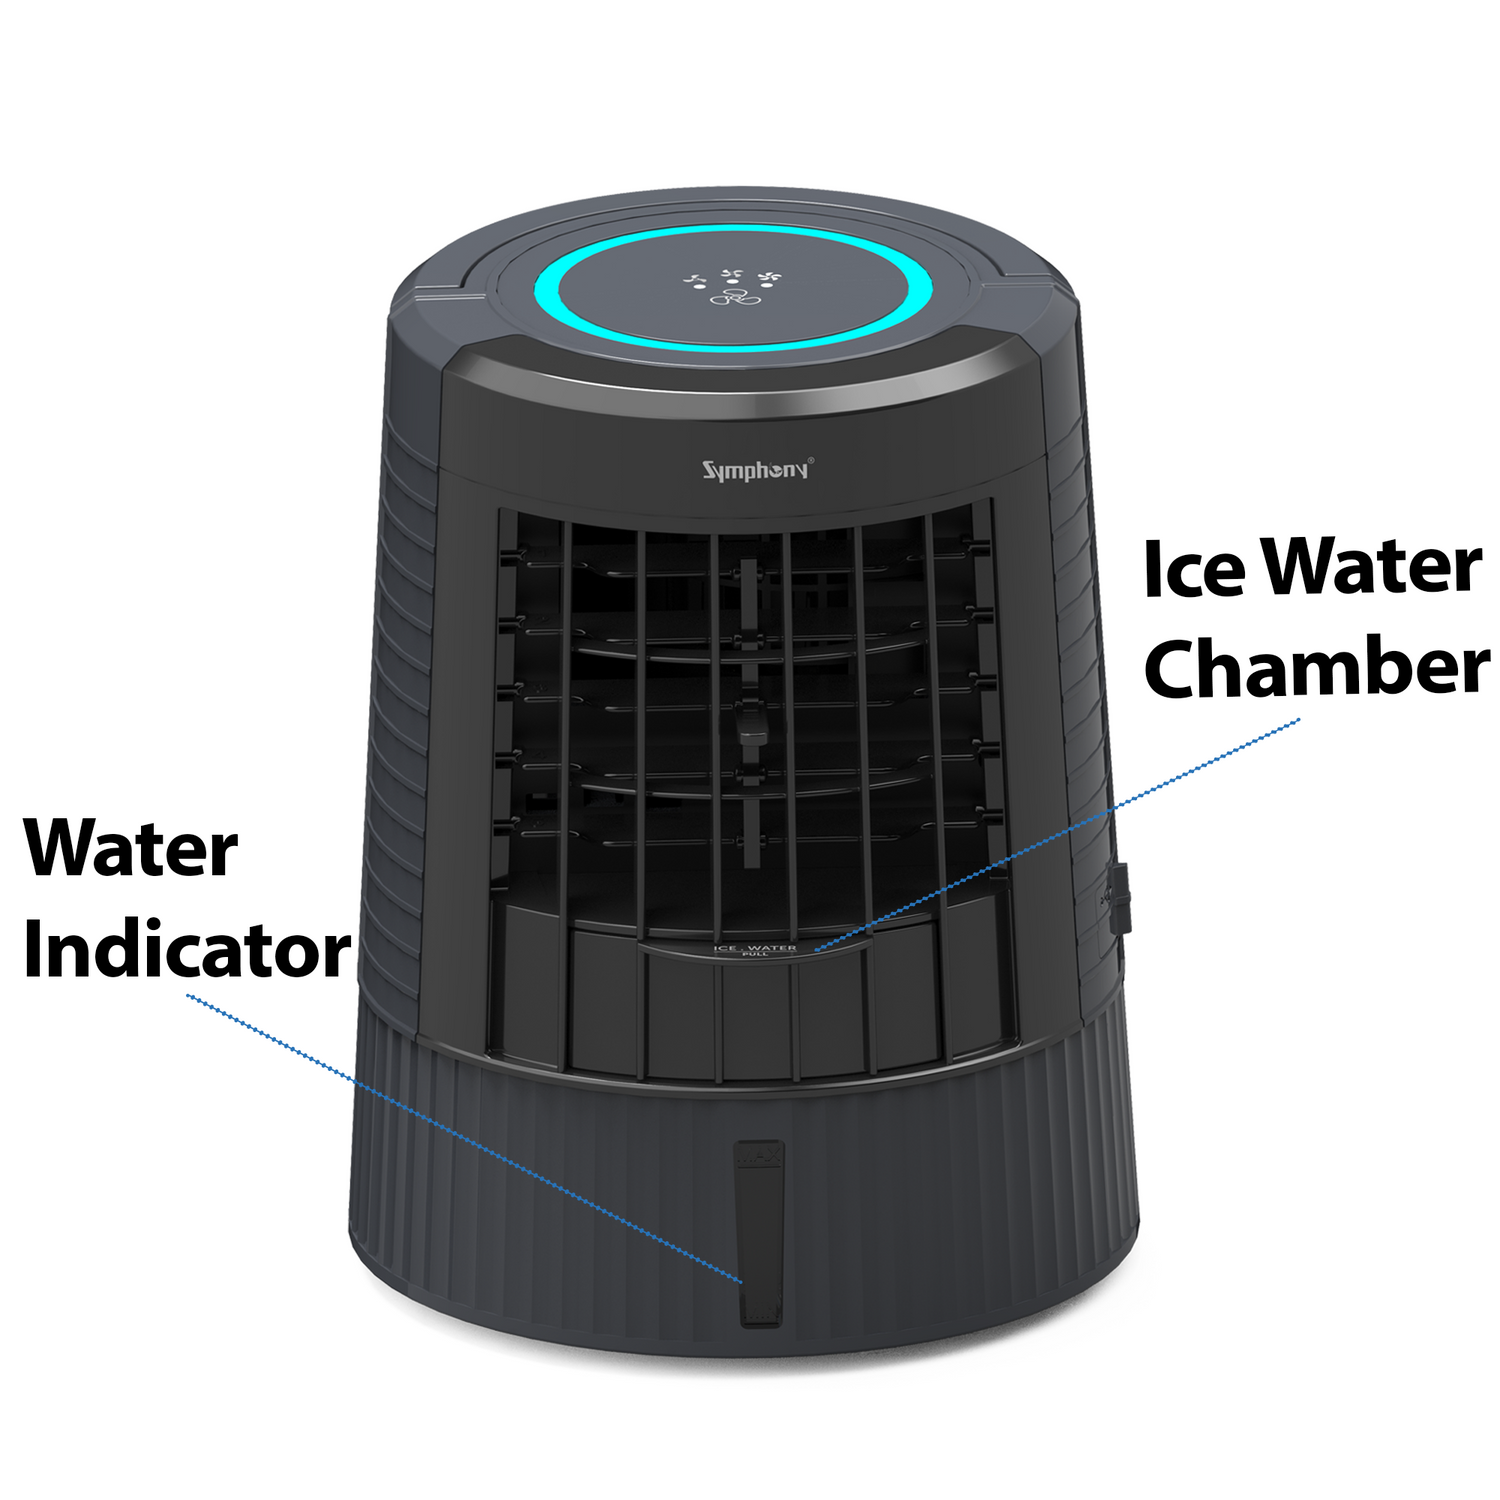 Water/Ice chamber with refill reminder